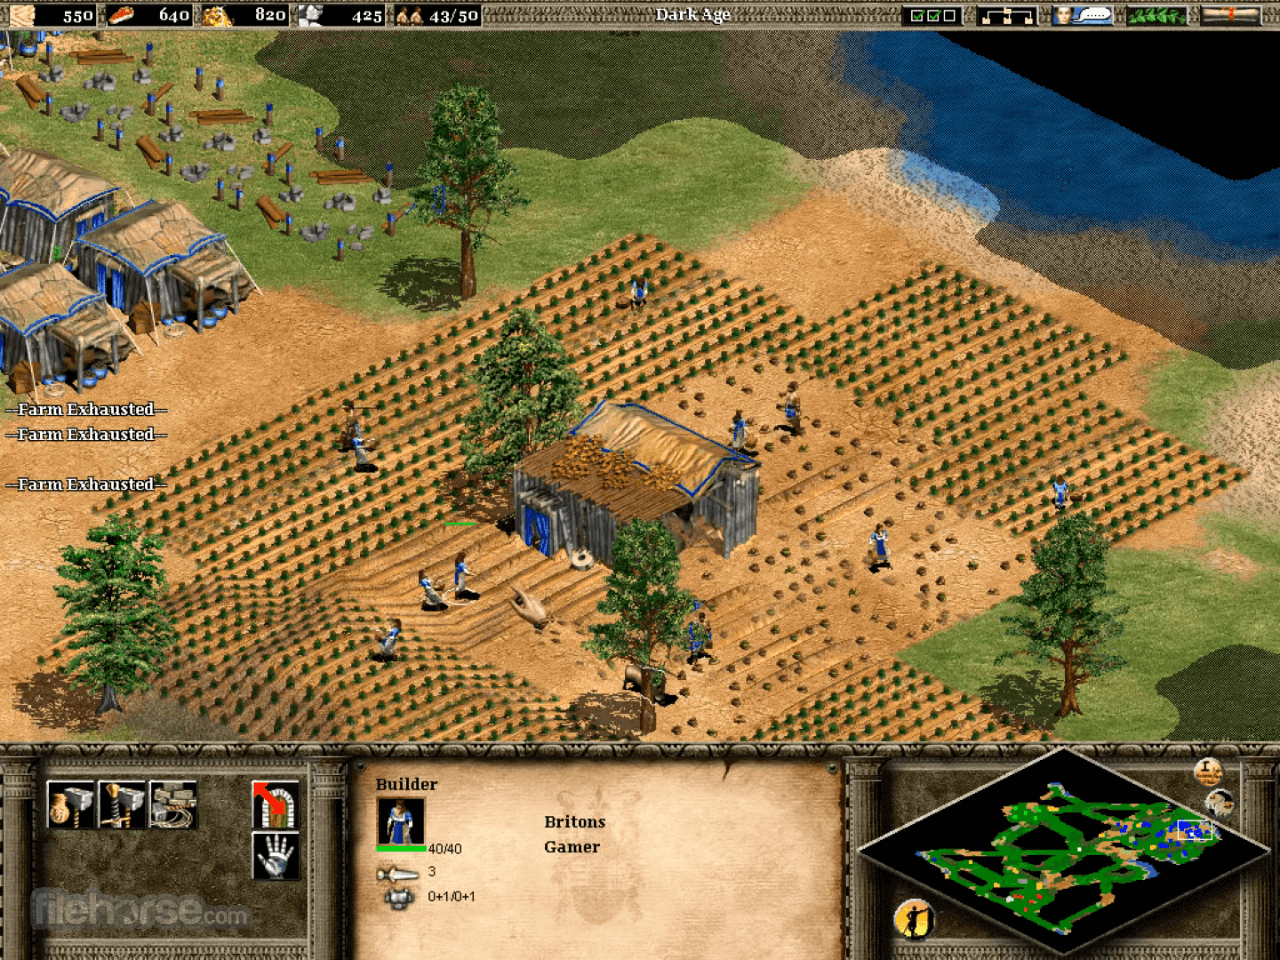 Age of empires 2 download free windows 10 download mp4 mp3 converter free